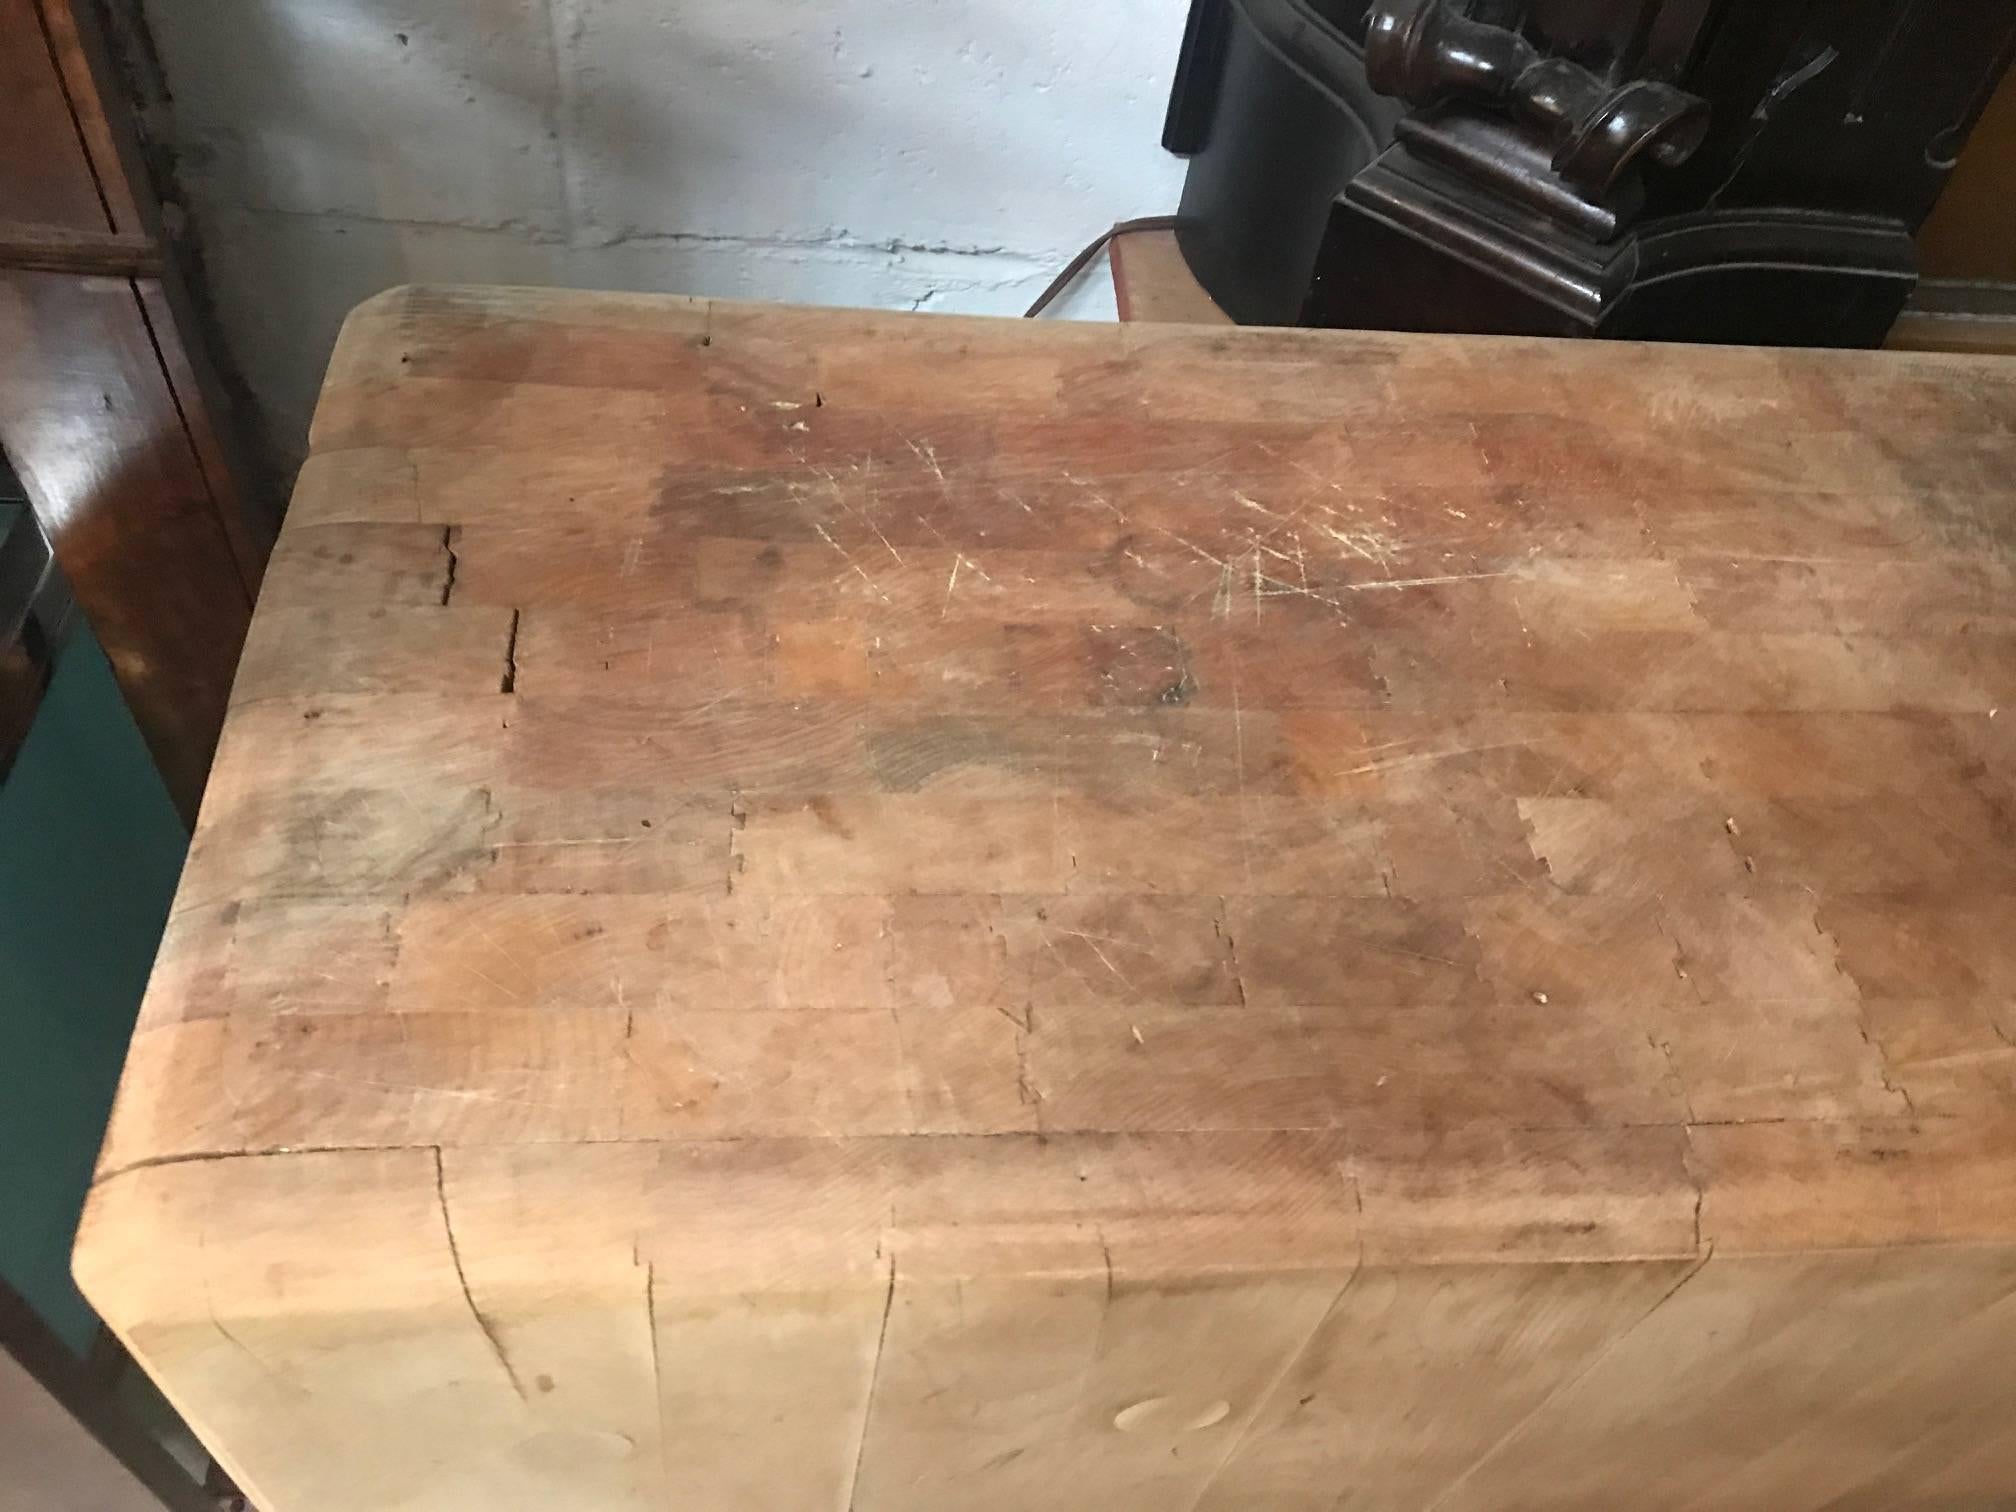 butcher block table for sale